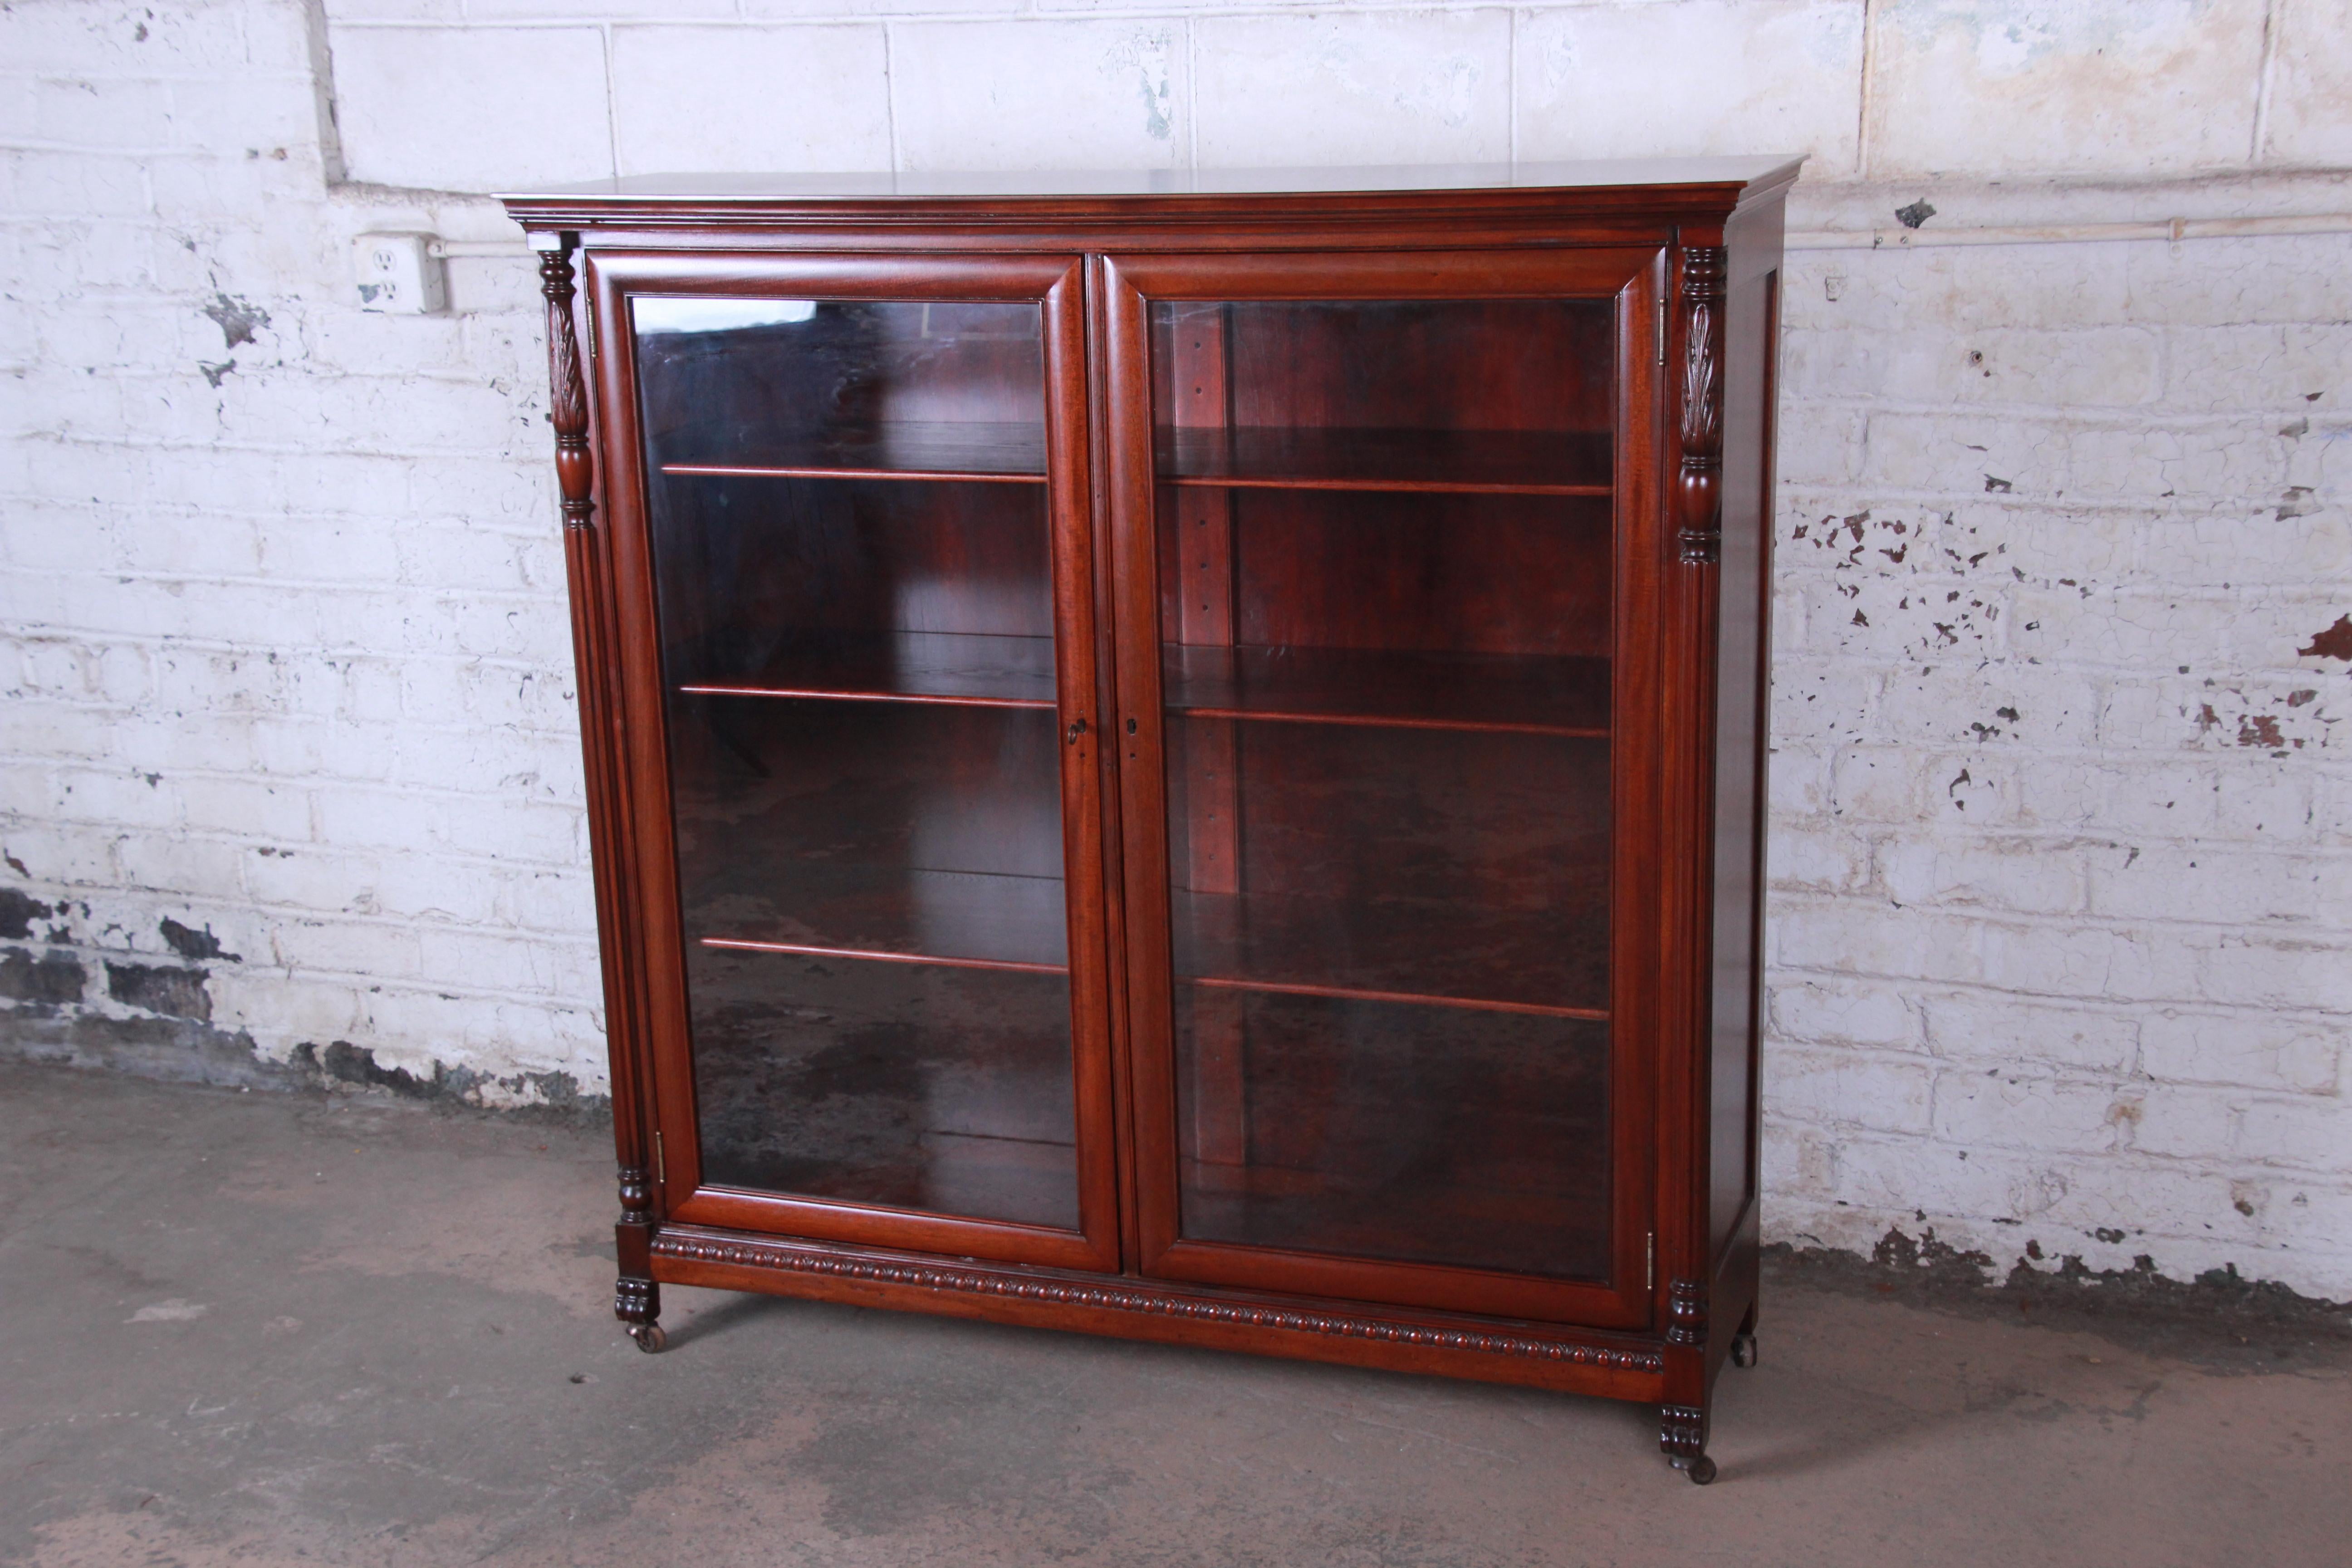 A beautiful antique carved mahogany glass front double bookcase. The bookcase features gorgeous carved details and solid mahogany construction. It offers excellent storage and display, with three adjustable shelves behind two glass doors. The